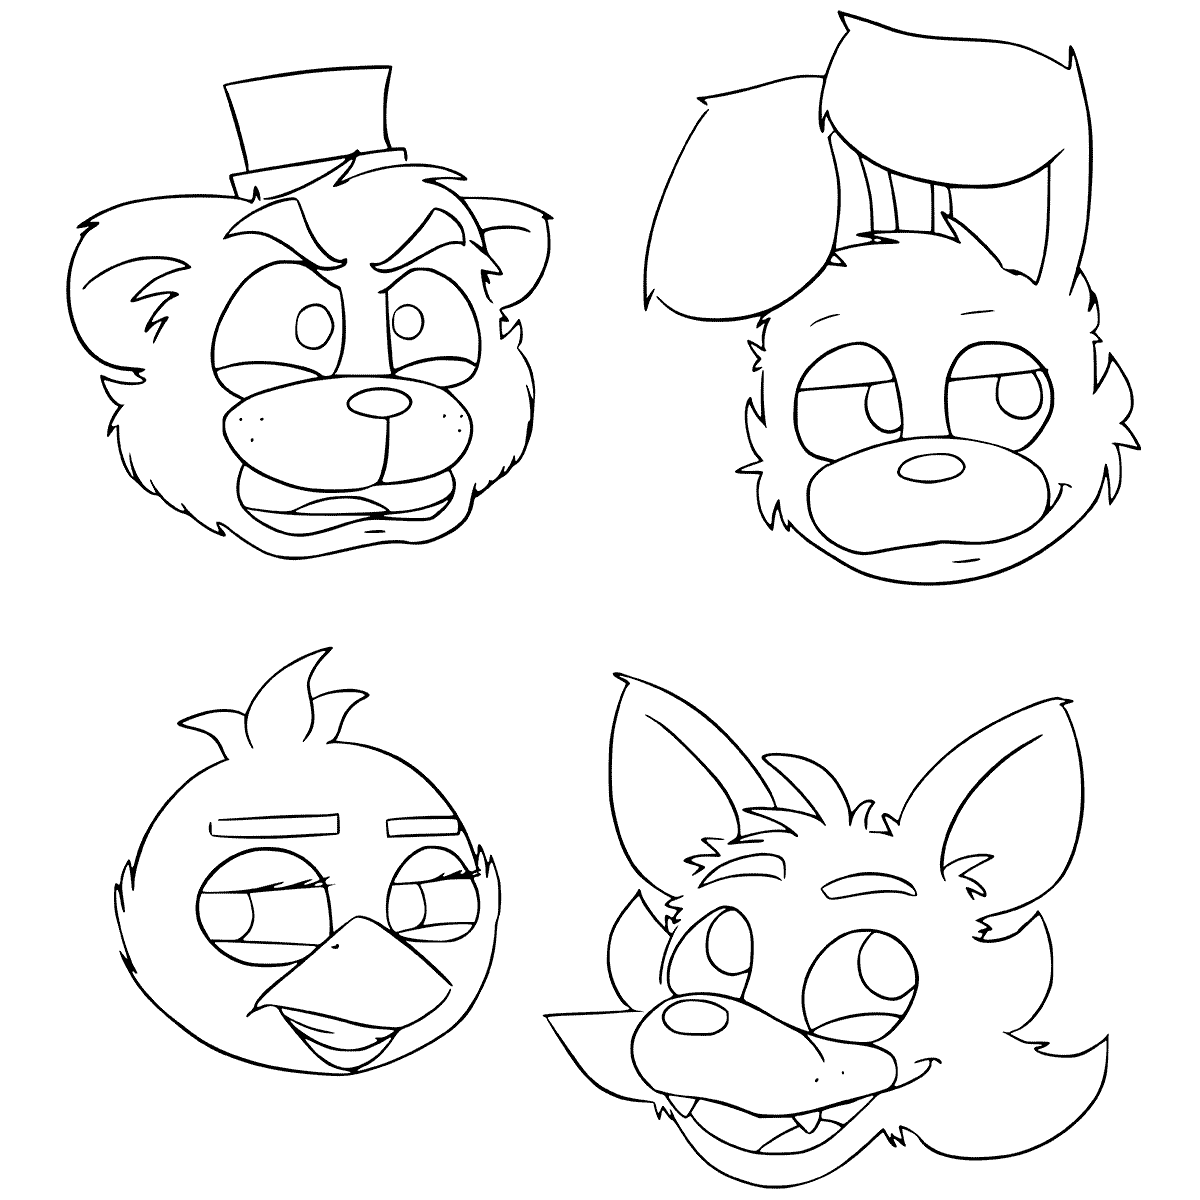 Five Nights at Freddy's Coloring Pages - GetColoringPages.com